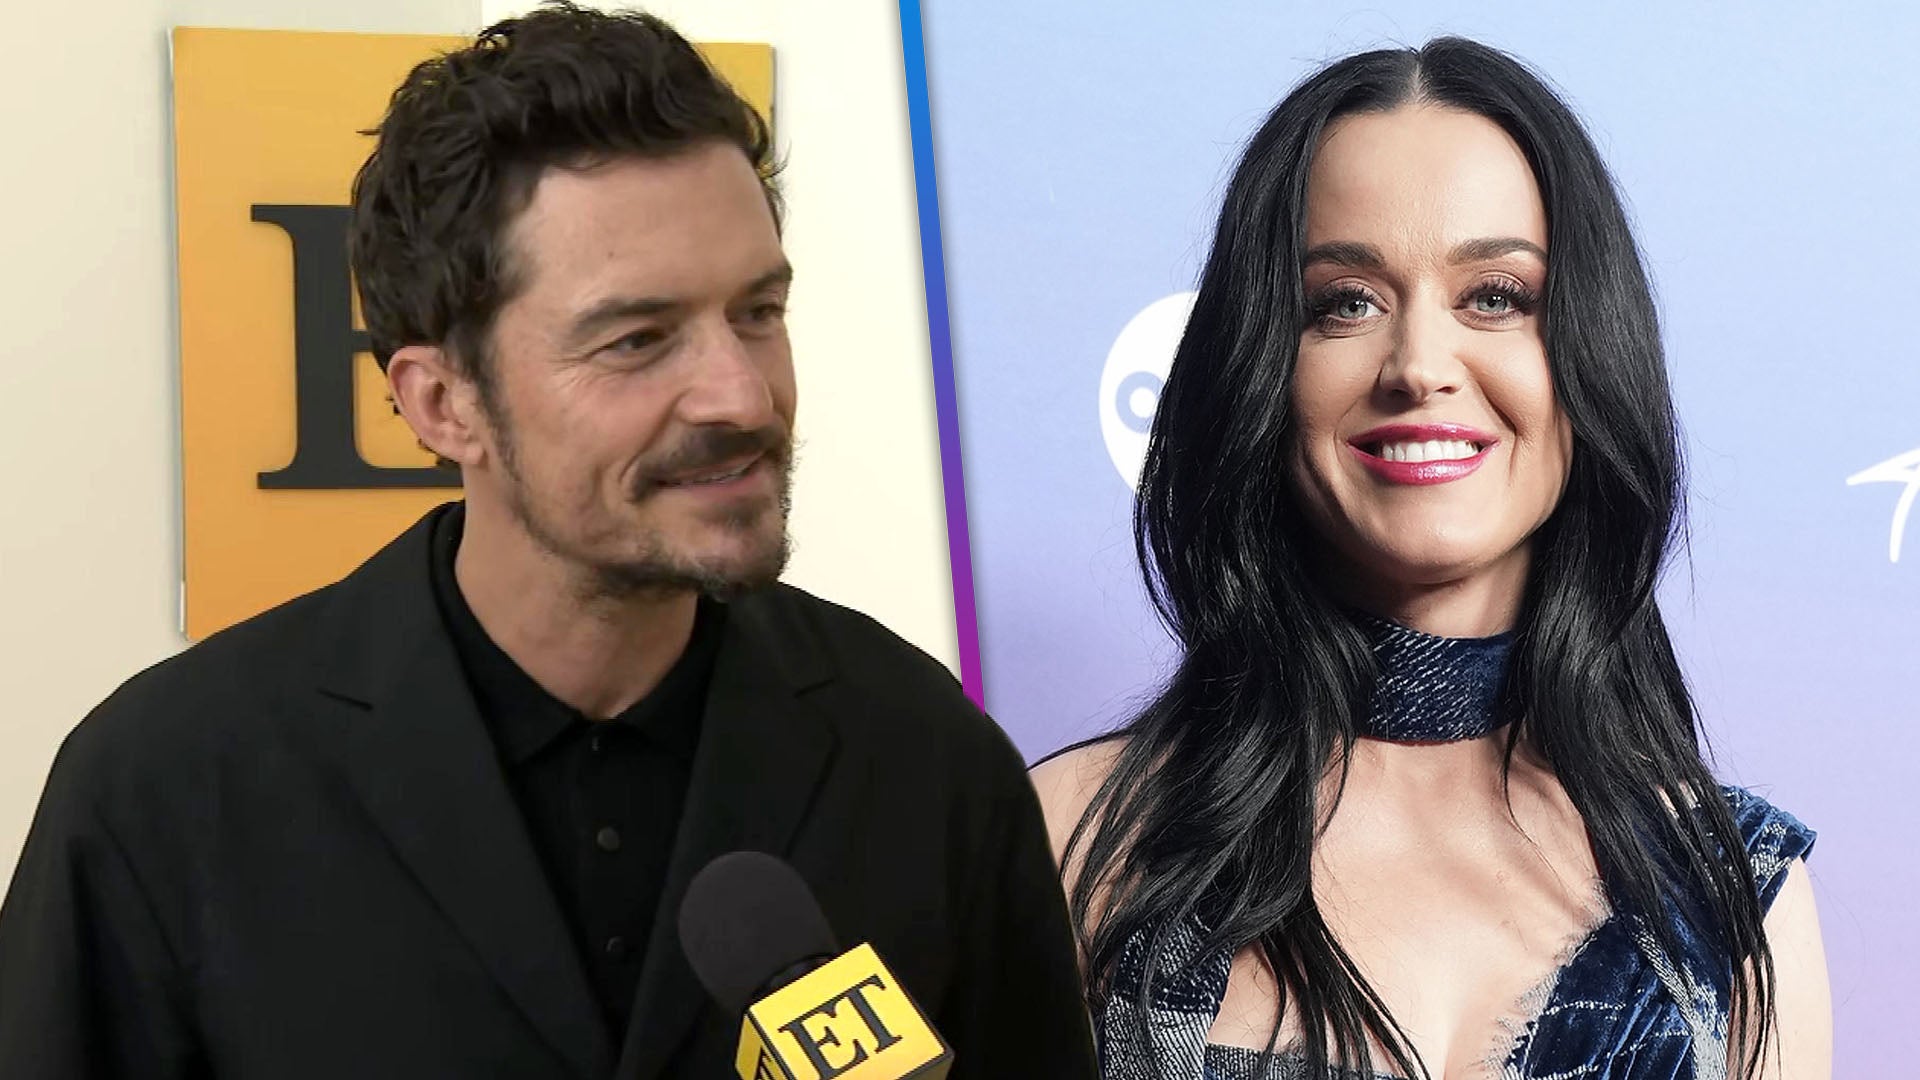 Orlando Bloom on His 'Girl' Katy Perry 'Representing' at King Charles' Coronation (Exclusive)